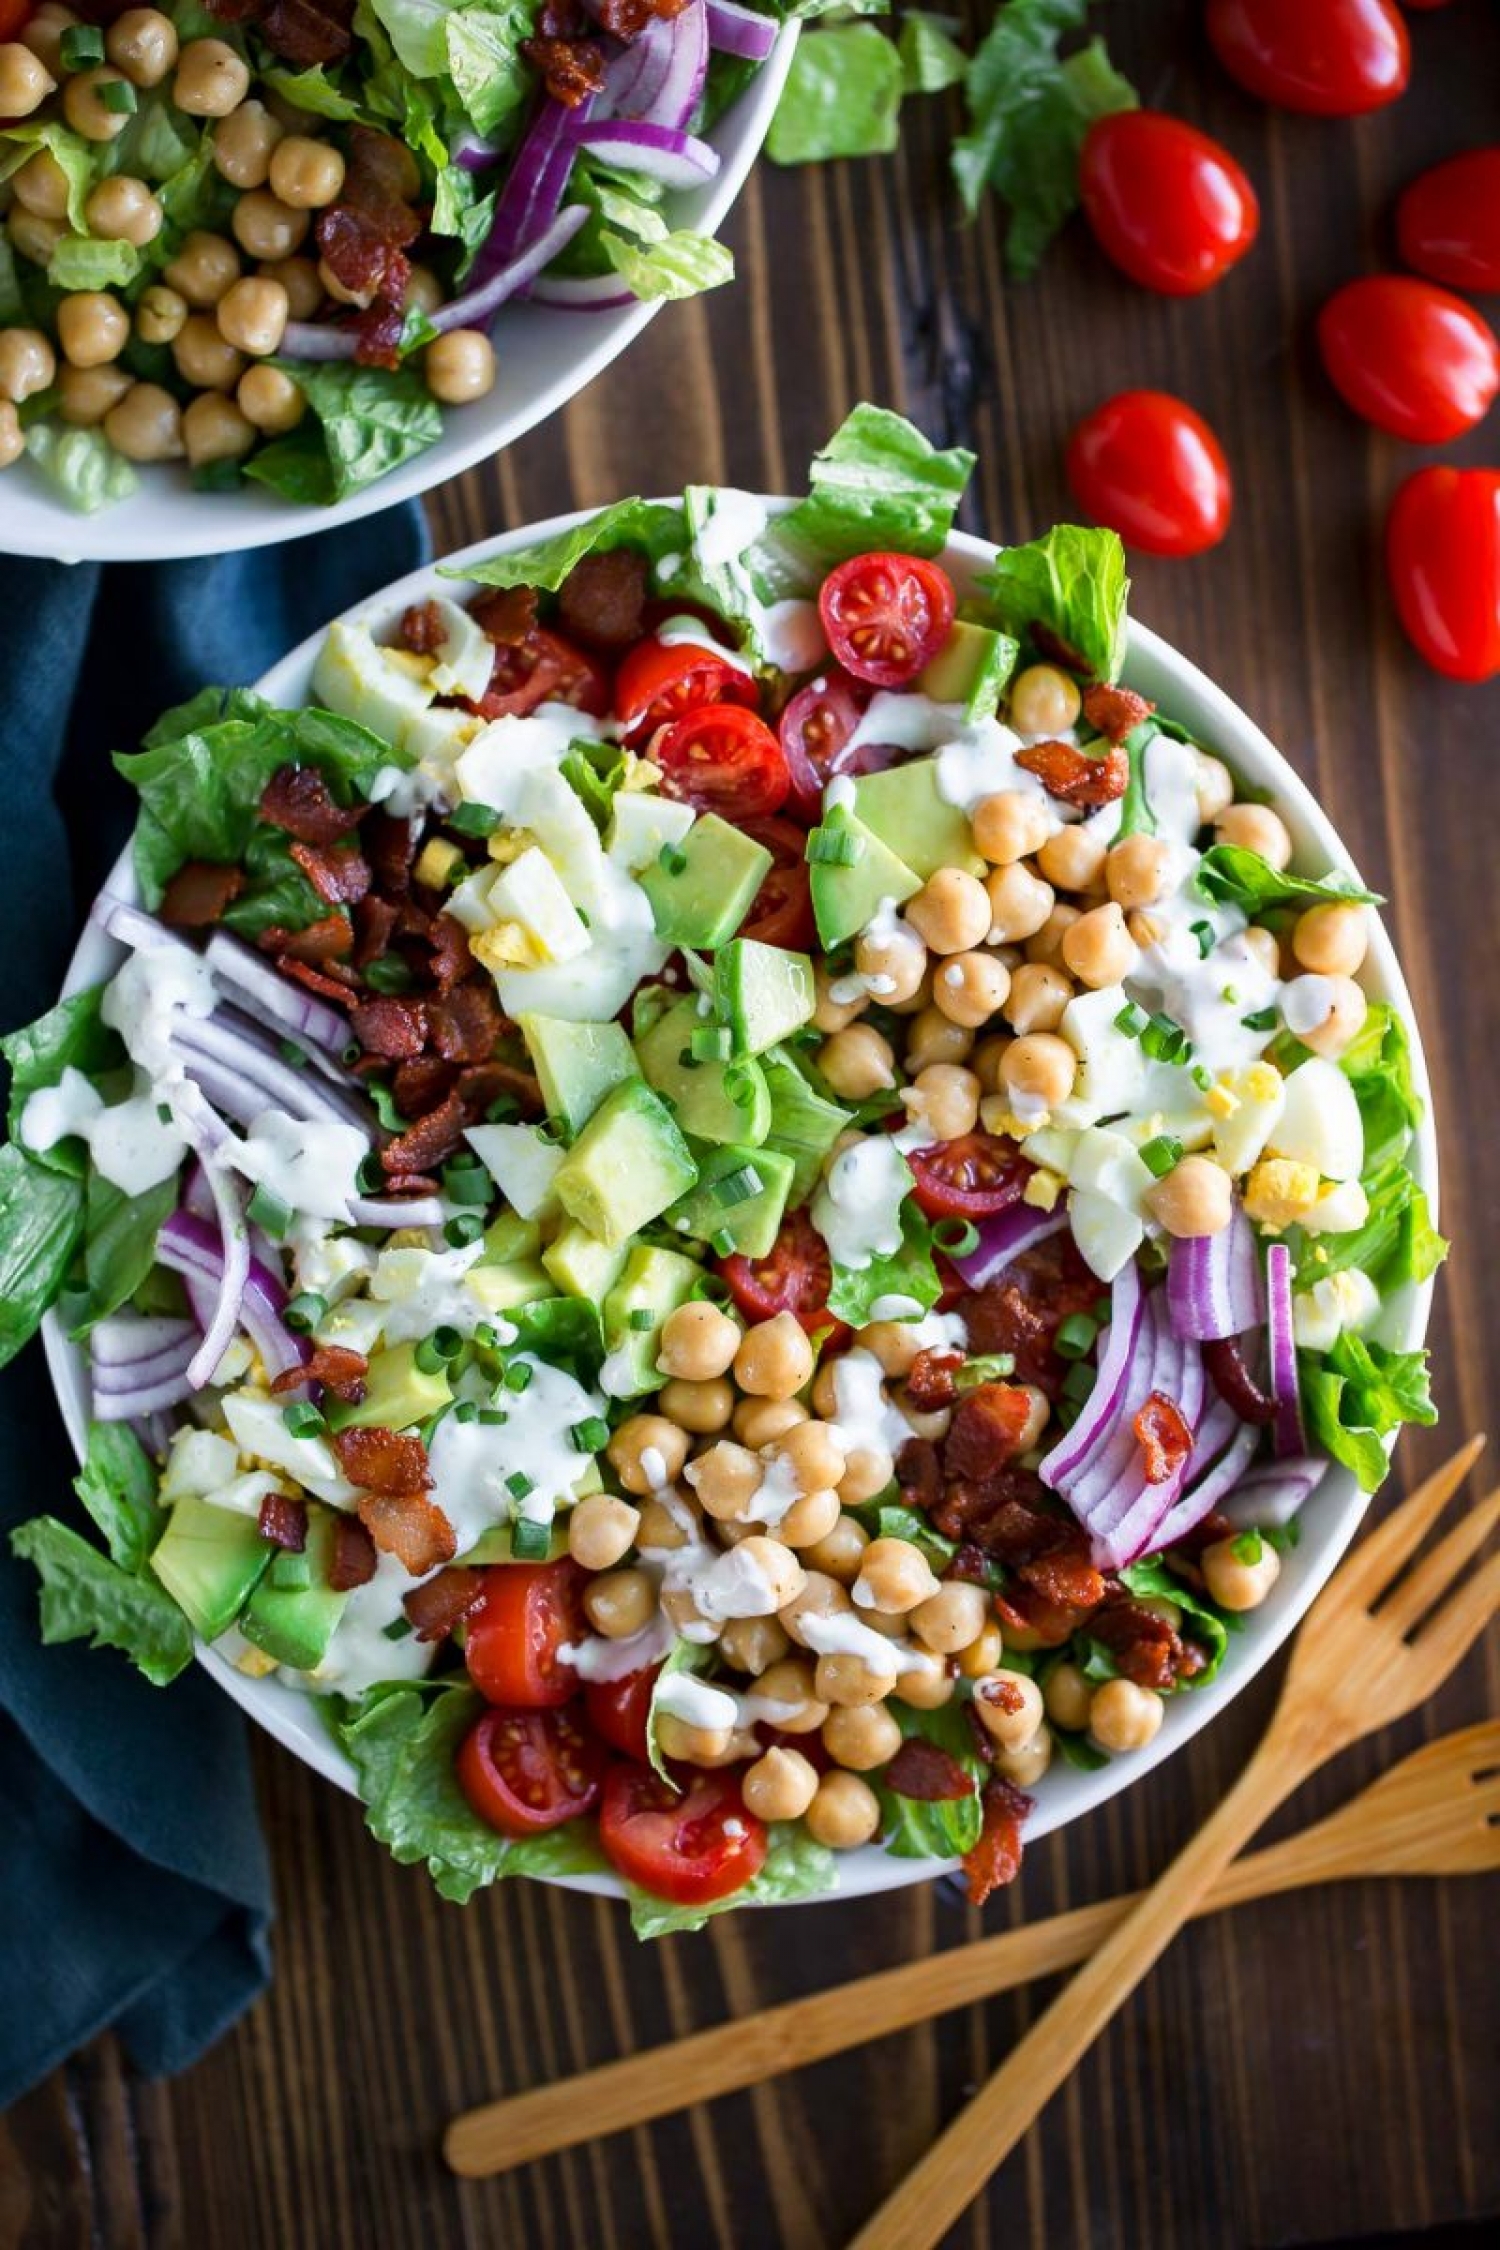 <p>Put a vegetarian spin on everybody's favorite classic American salad by swapping out the chicken for chickpeas! Don't forget to sub in veggie bacon, too. It's healthier, and with all the other goodness in there, no one will miss the meat. <a href="https://peasandcrayons.com/2020/01/chickpea-cobb-salad.html" rel="noopener">Get the recipe here.</a></p>